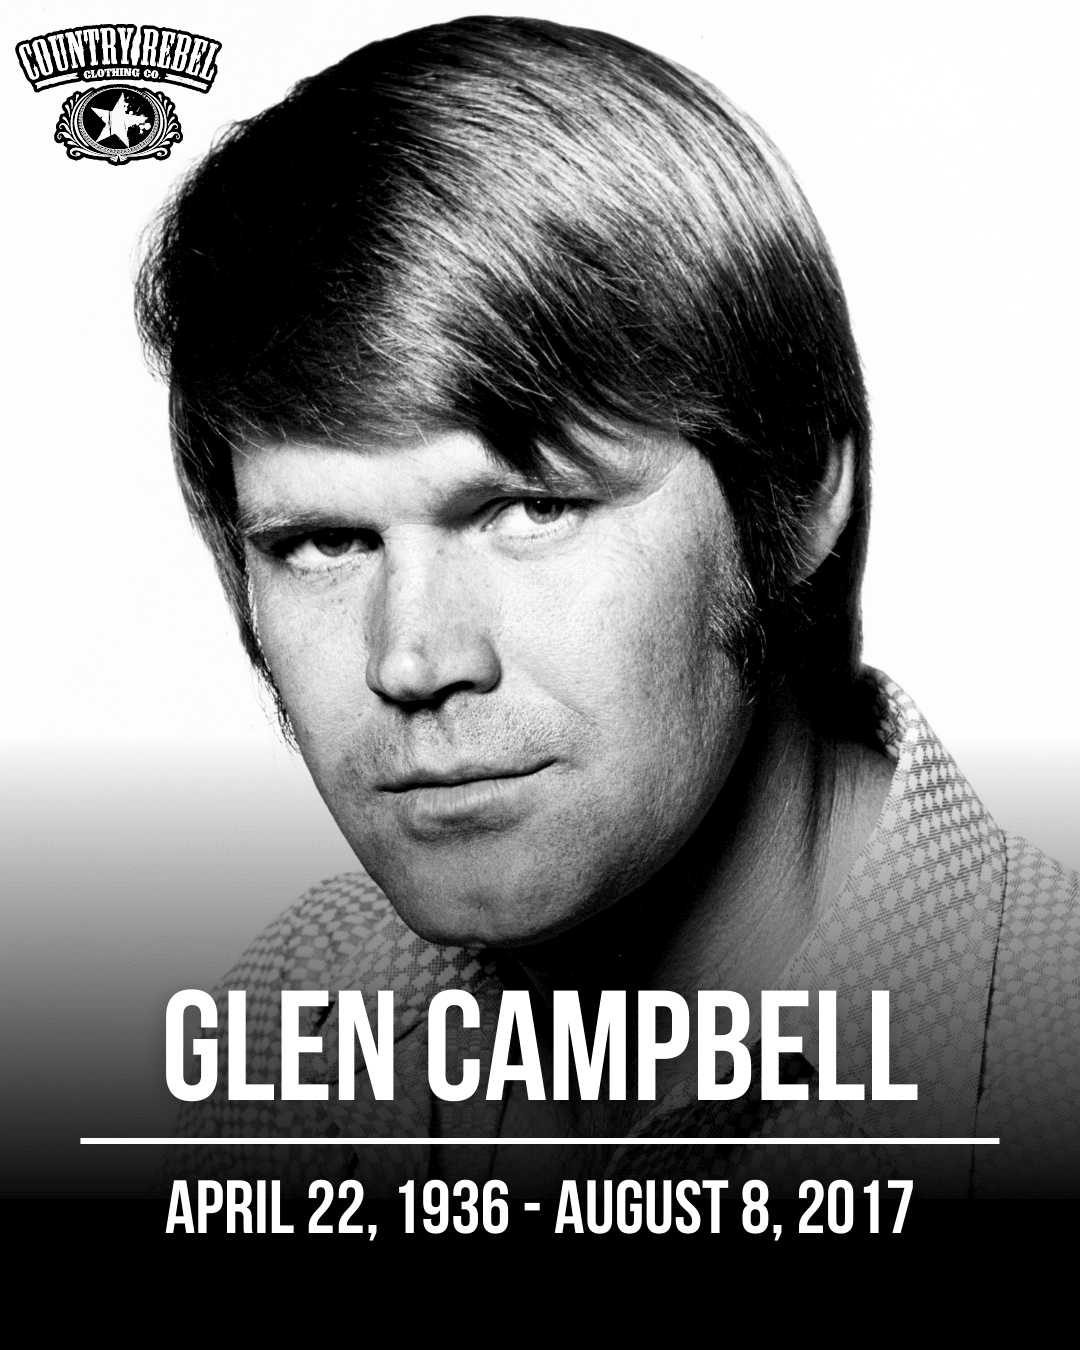 Glen Campbell recorded the song "Galveston" and turned it into a #1 hit